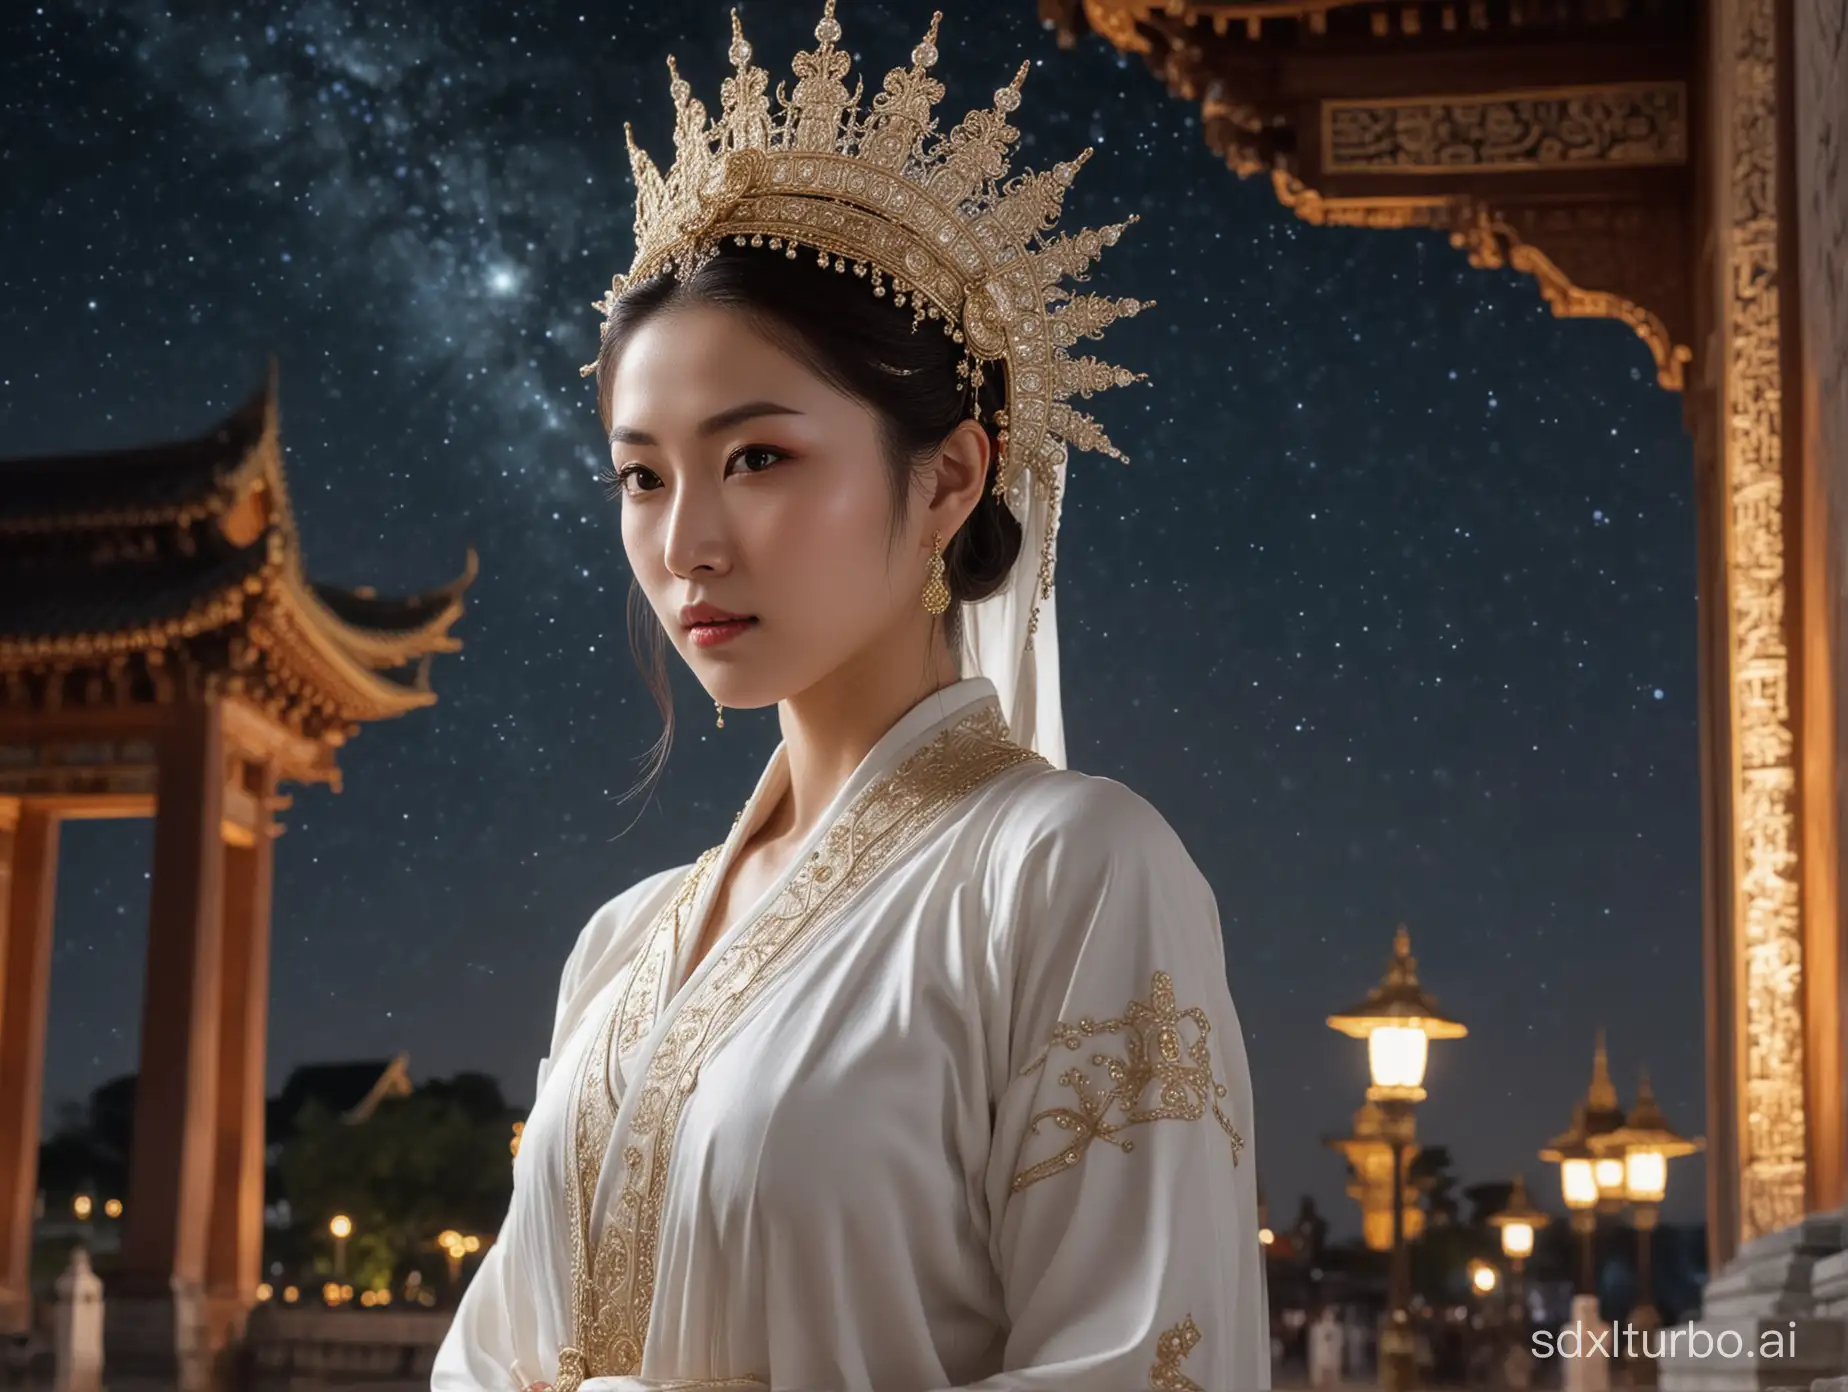 A female bodhisattva with a strong sense of future technology, she has fair skin and a graceful figure. Dressed in white robes, beautiful headdress, chest ornament. (Salasadi) appears in front of the palace gate wearing sparkling clothing, with visual highlight and deep eyes. The picture begins with a starry sky, and gradually zooms in on the shining Buddhist palace.